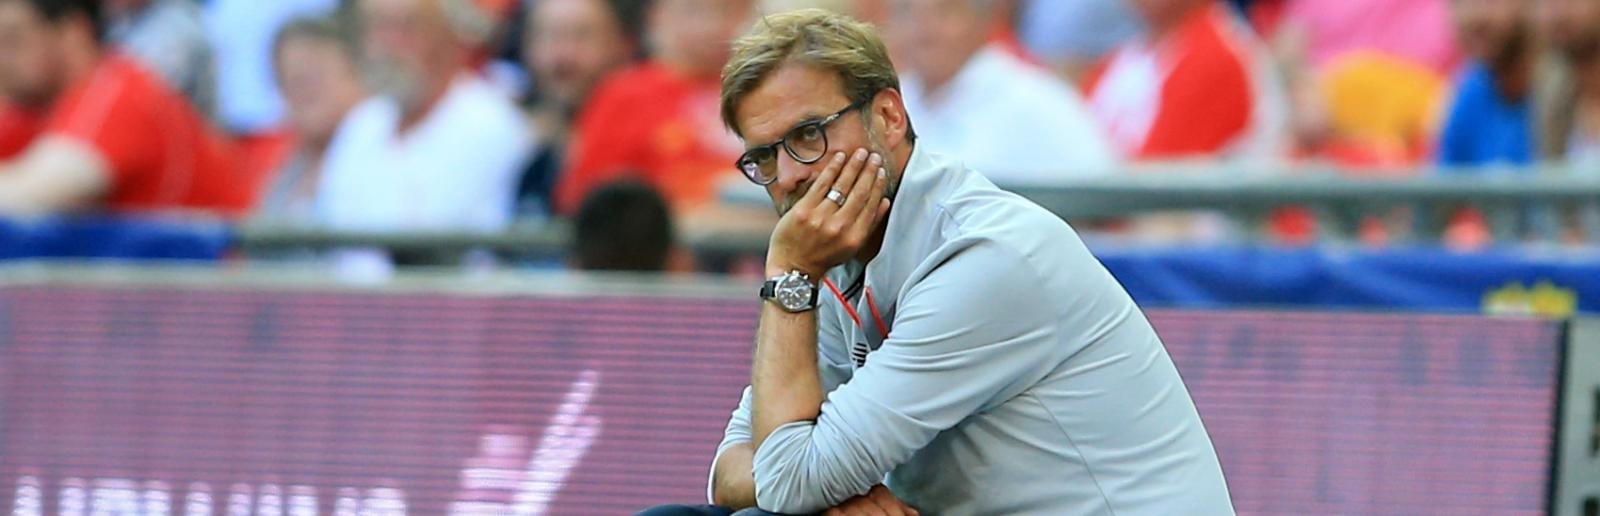 Where does Liverpool’s Jurgen Klopp turn to after that Burnley reality check?